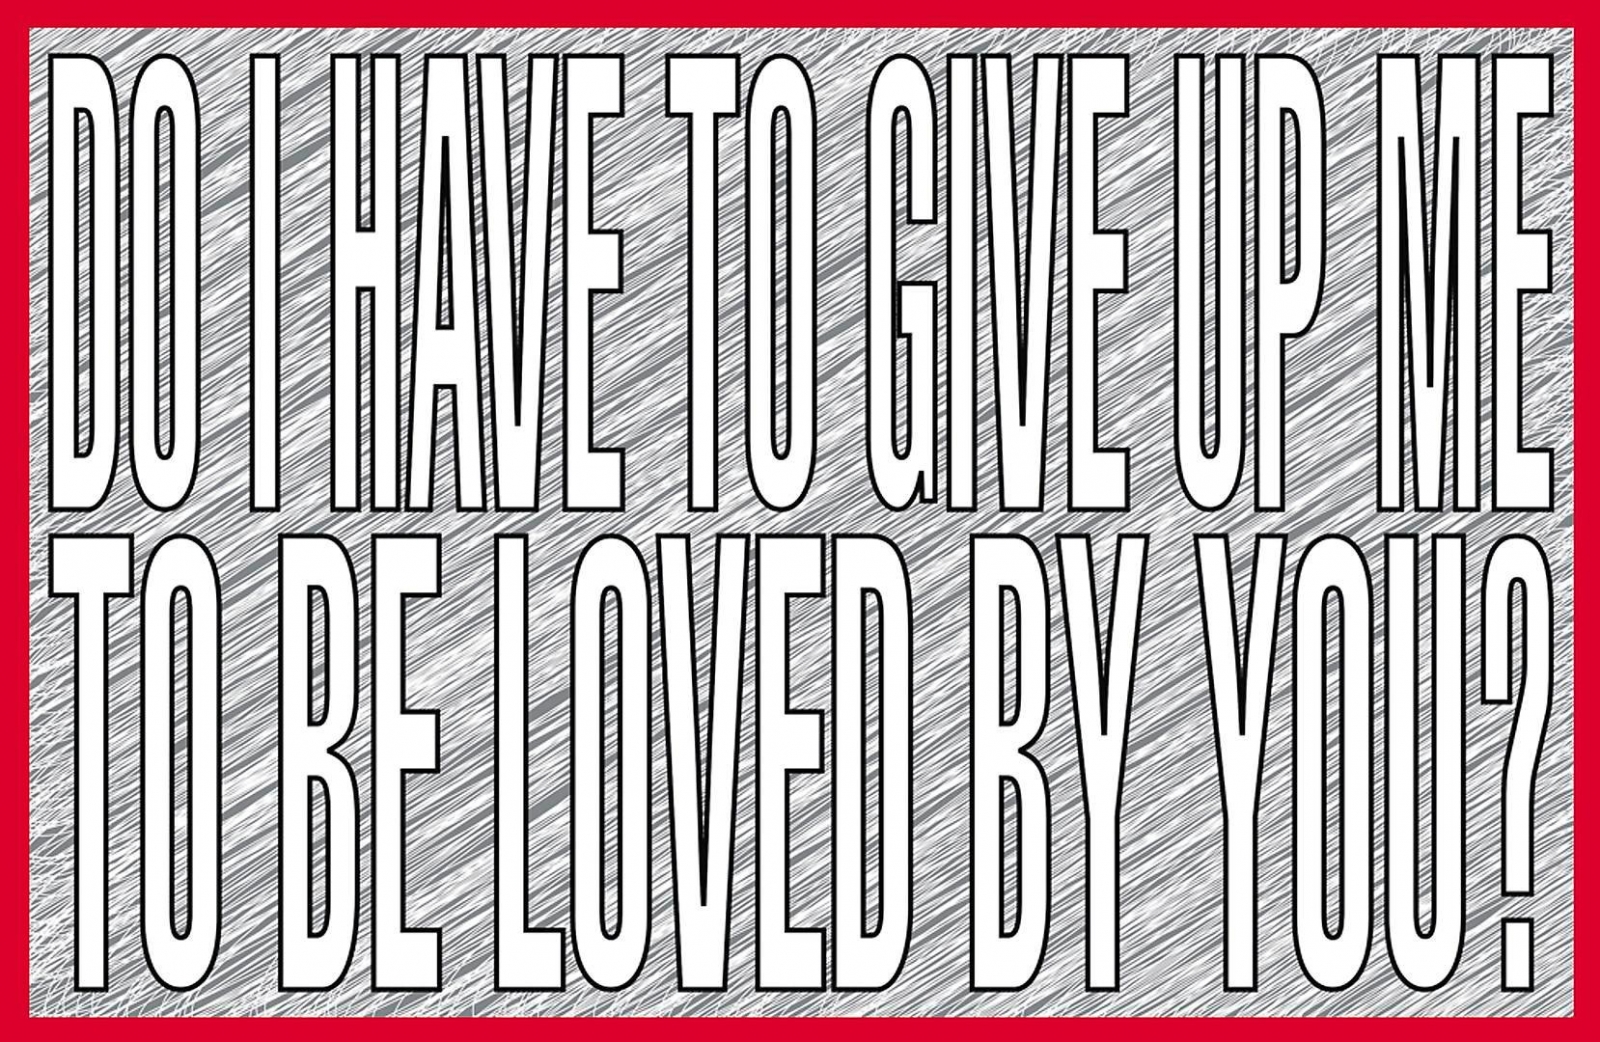 BARBARA KRUGER Do I have to give up me to be loved by you?, 2011